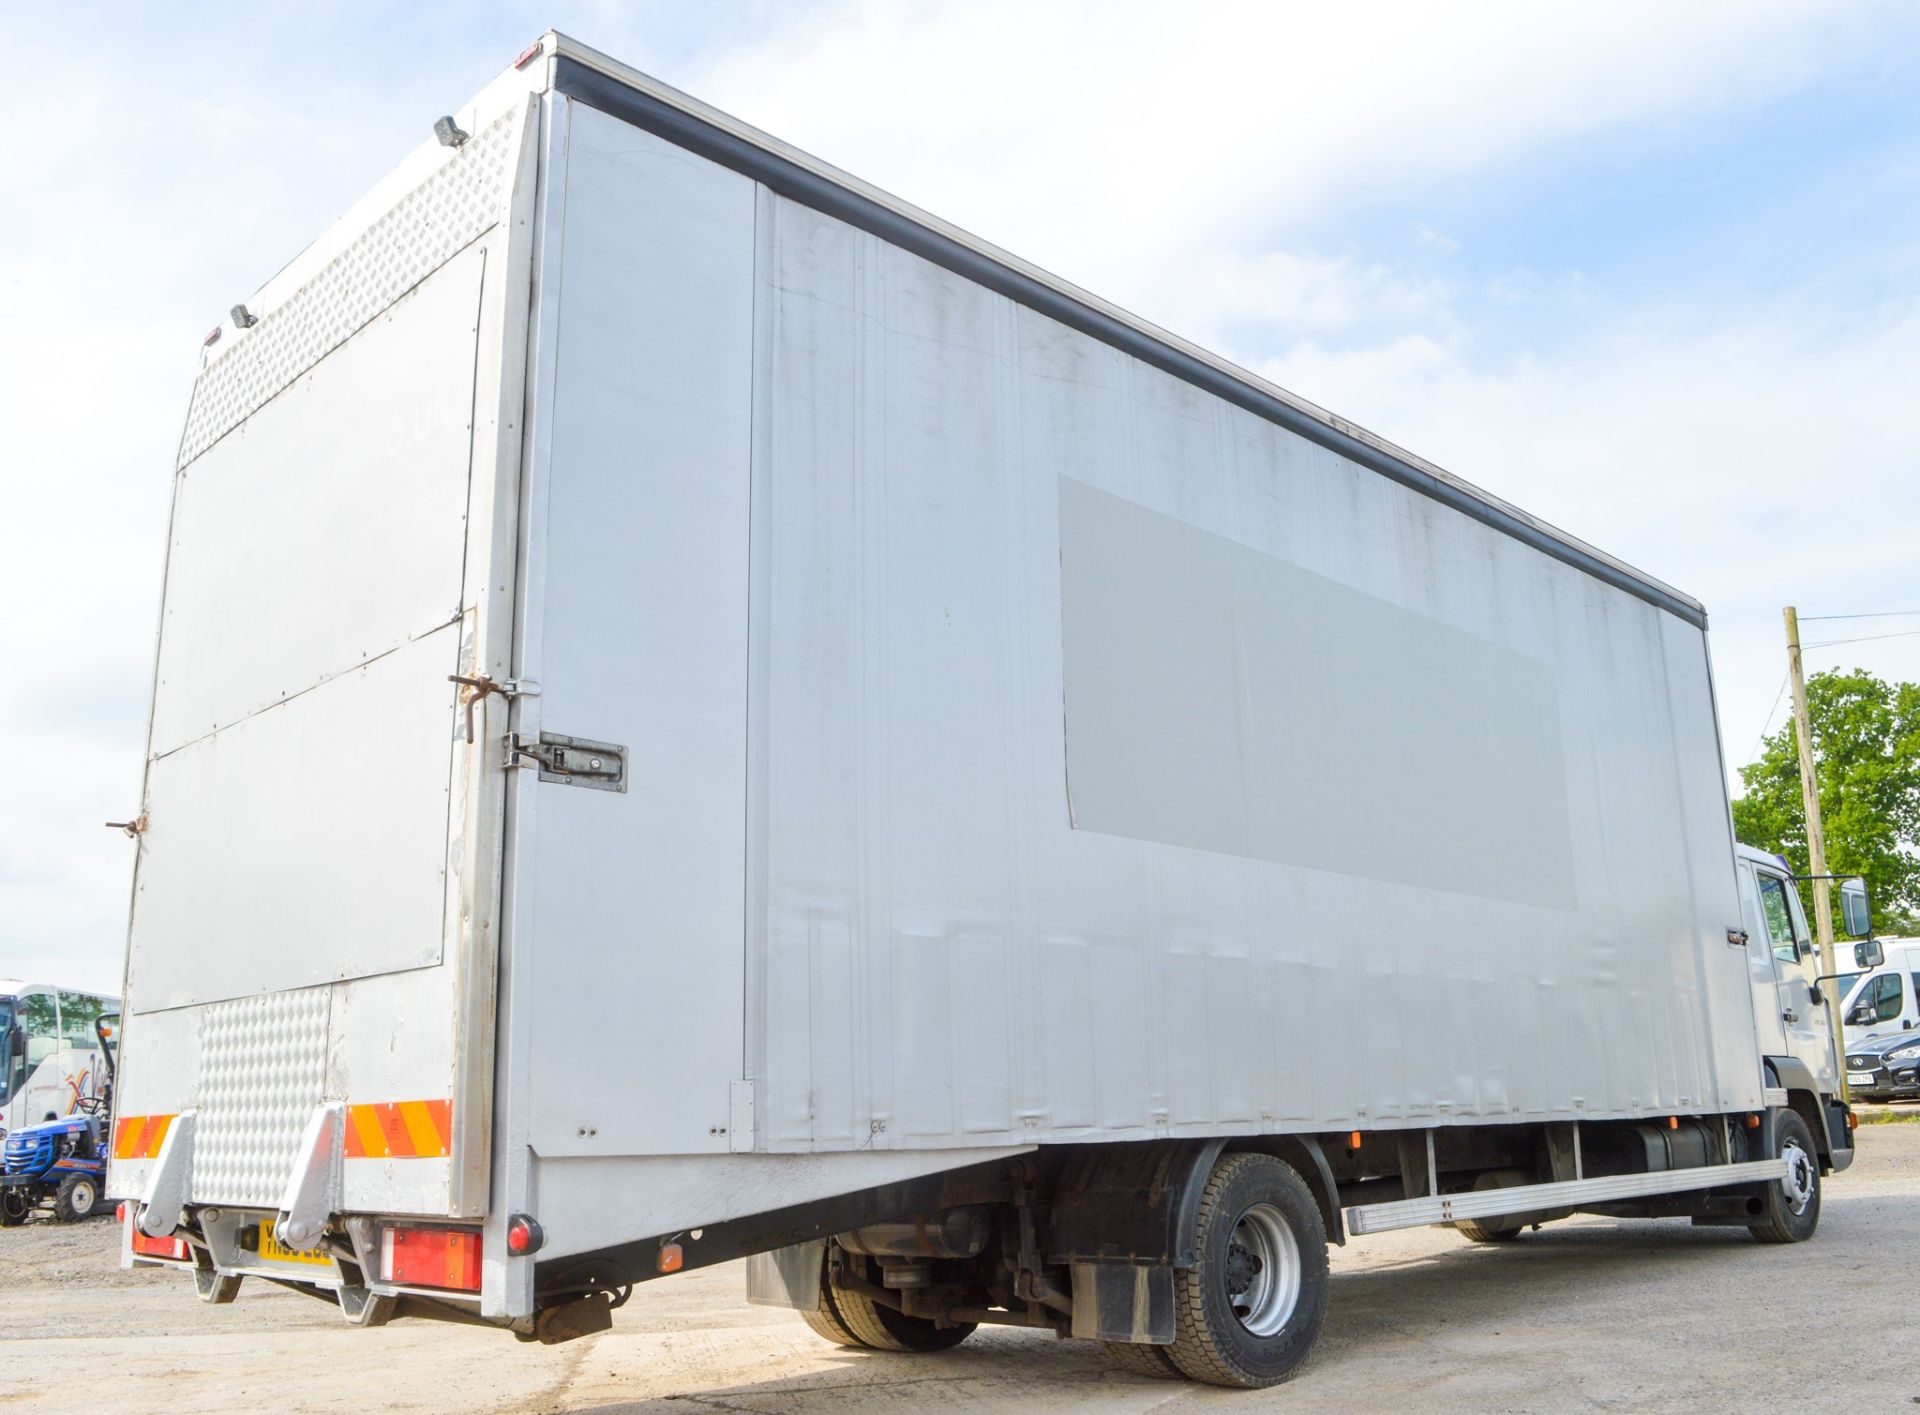 MAN 12.225 12 tonne curtain sided vehicle transporter lorry Registration Number: YN05 EGY Date of - Image 3 of 17